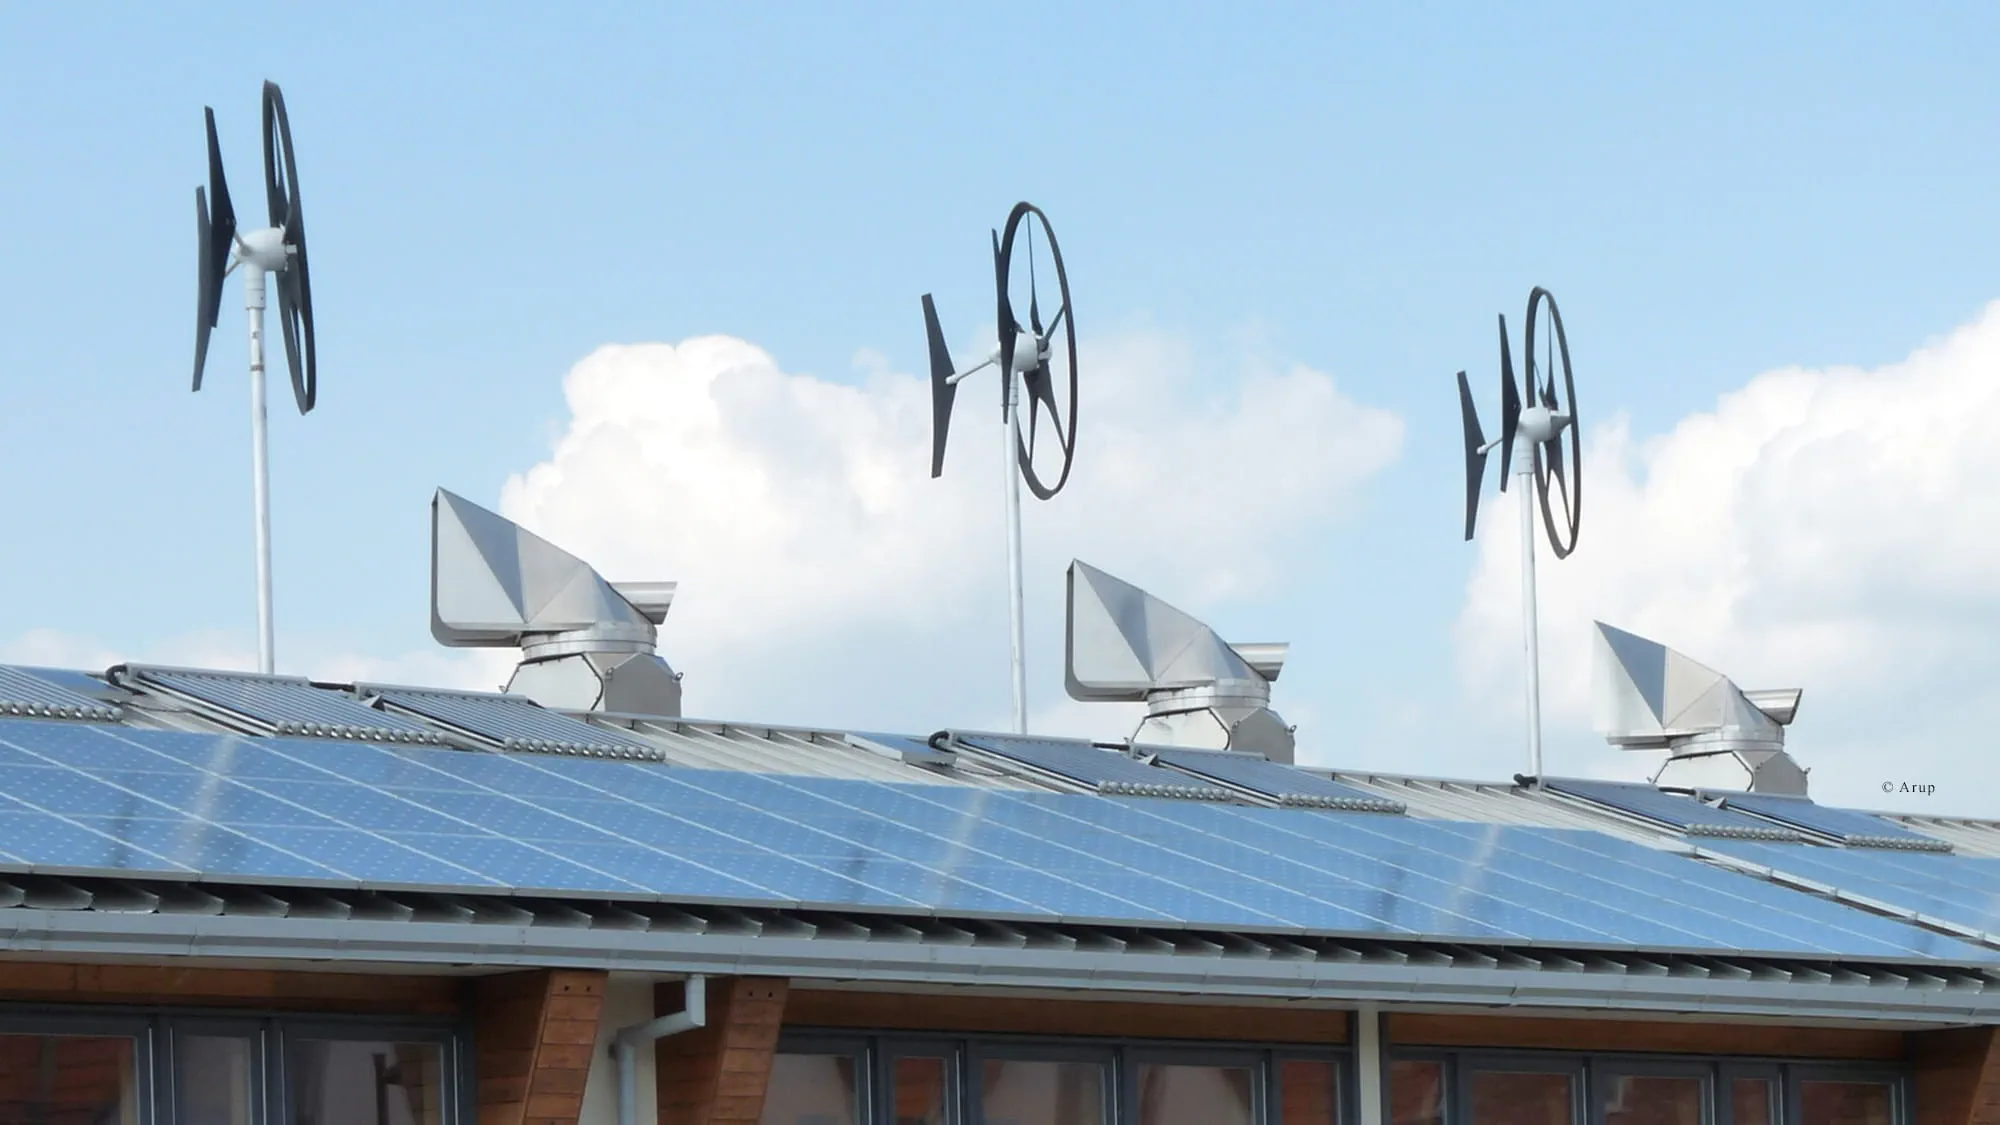 Wind turbines and solar panels on the roof of a house.